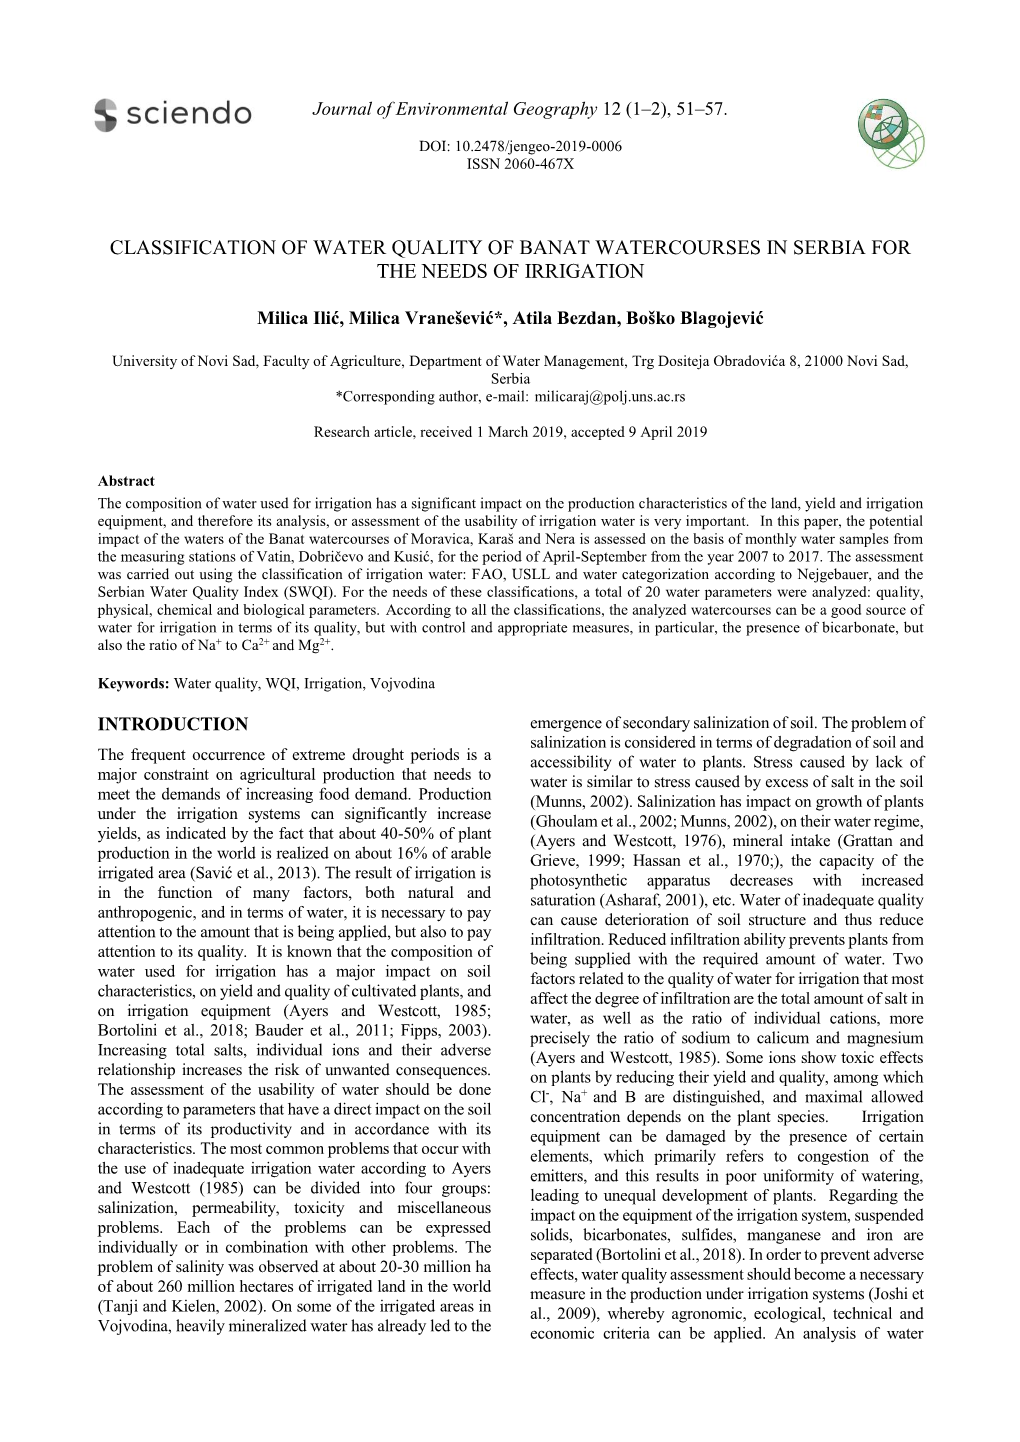 Classification of Water Quality of Banat Watercourses in Serbia for the Needs of Irrigation